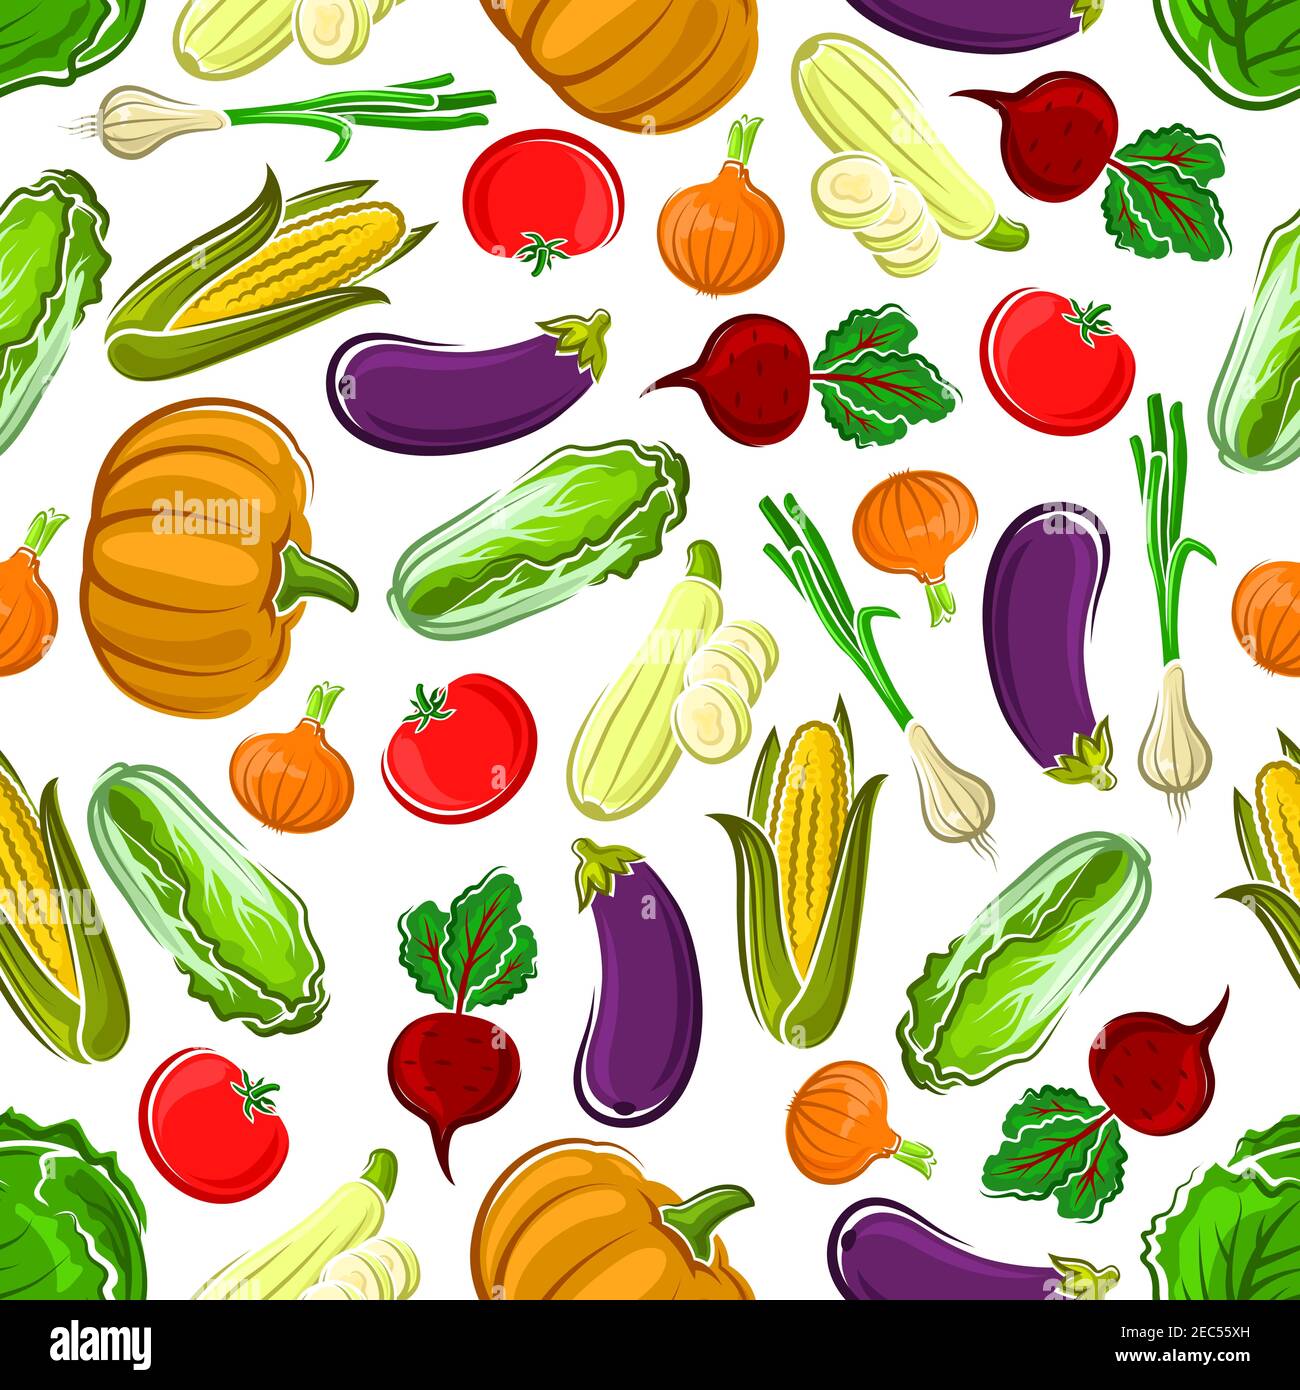 Seamless pattern background of ripe pumpkins, tomatoes and eggplants, sweet corn cobs, beetroots and cabbages, onions and zucchini vegetables. Use as Stock Vector